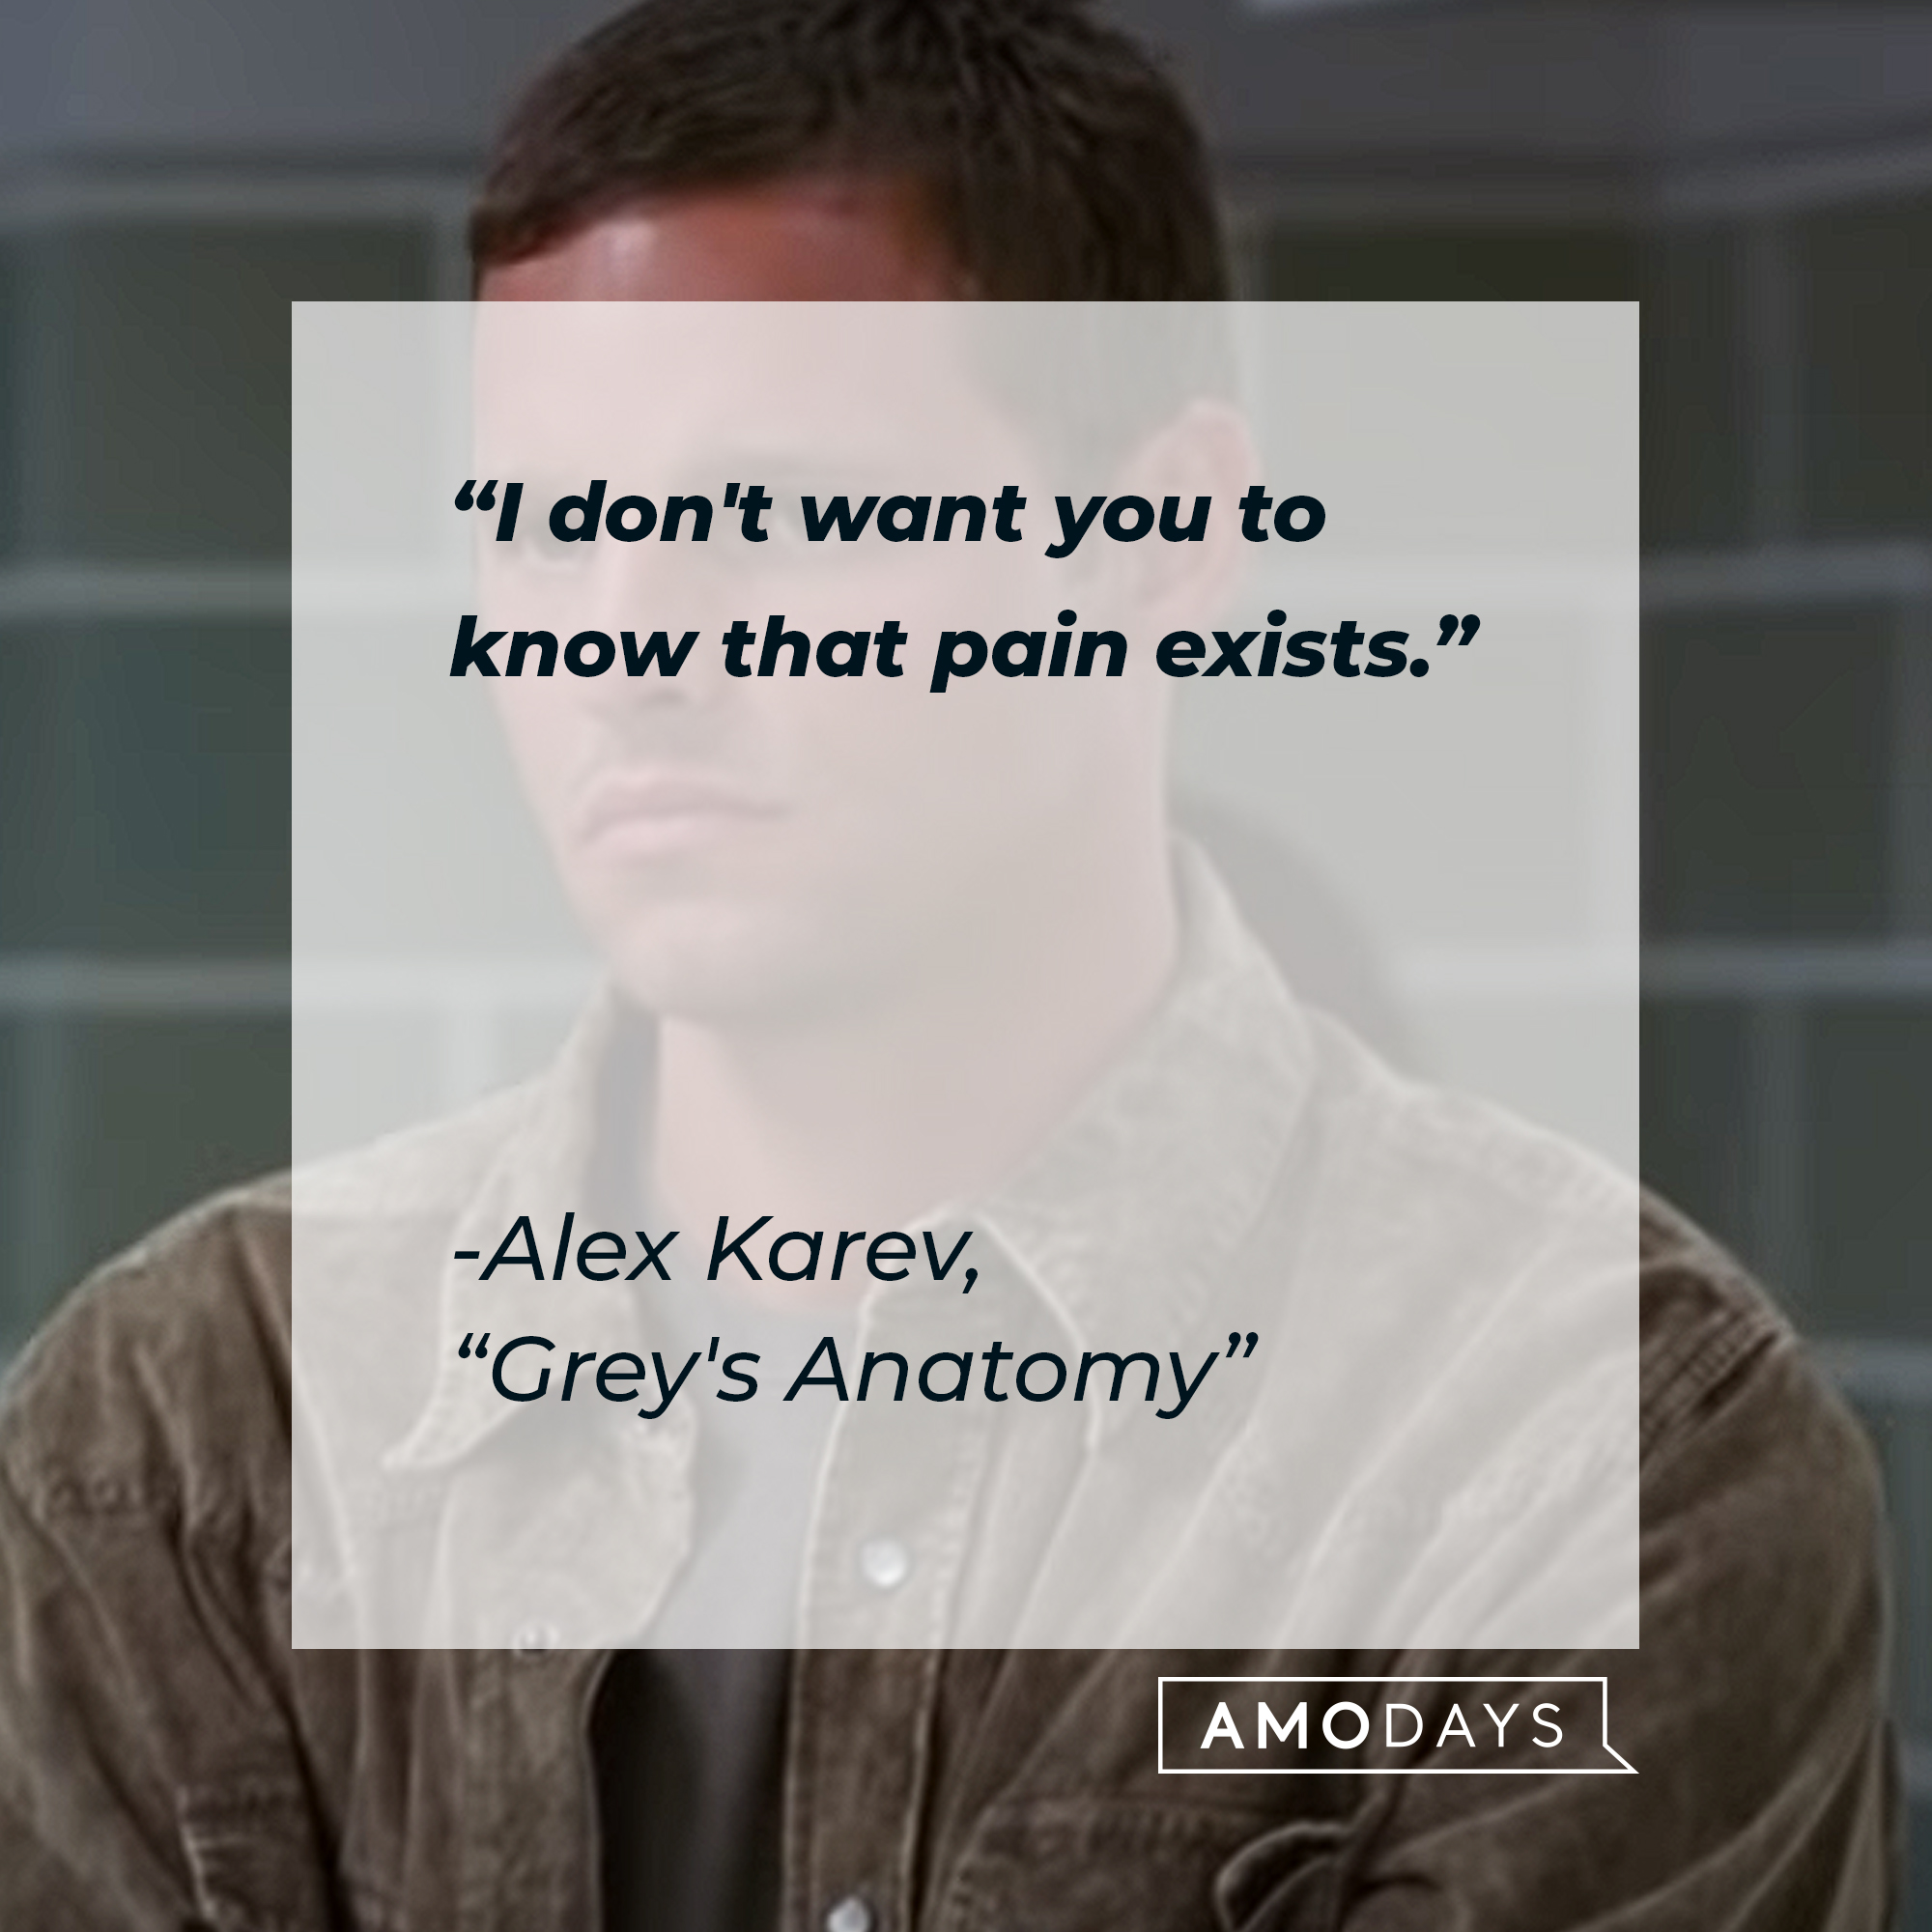 Alex Karev’s quote from “Grey’s Anatomy”: “I don't want you to know that pain exists.” | Source: youtube.com/ABCNetwork